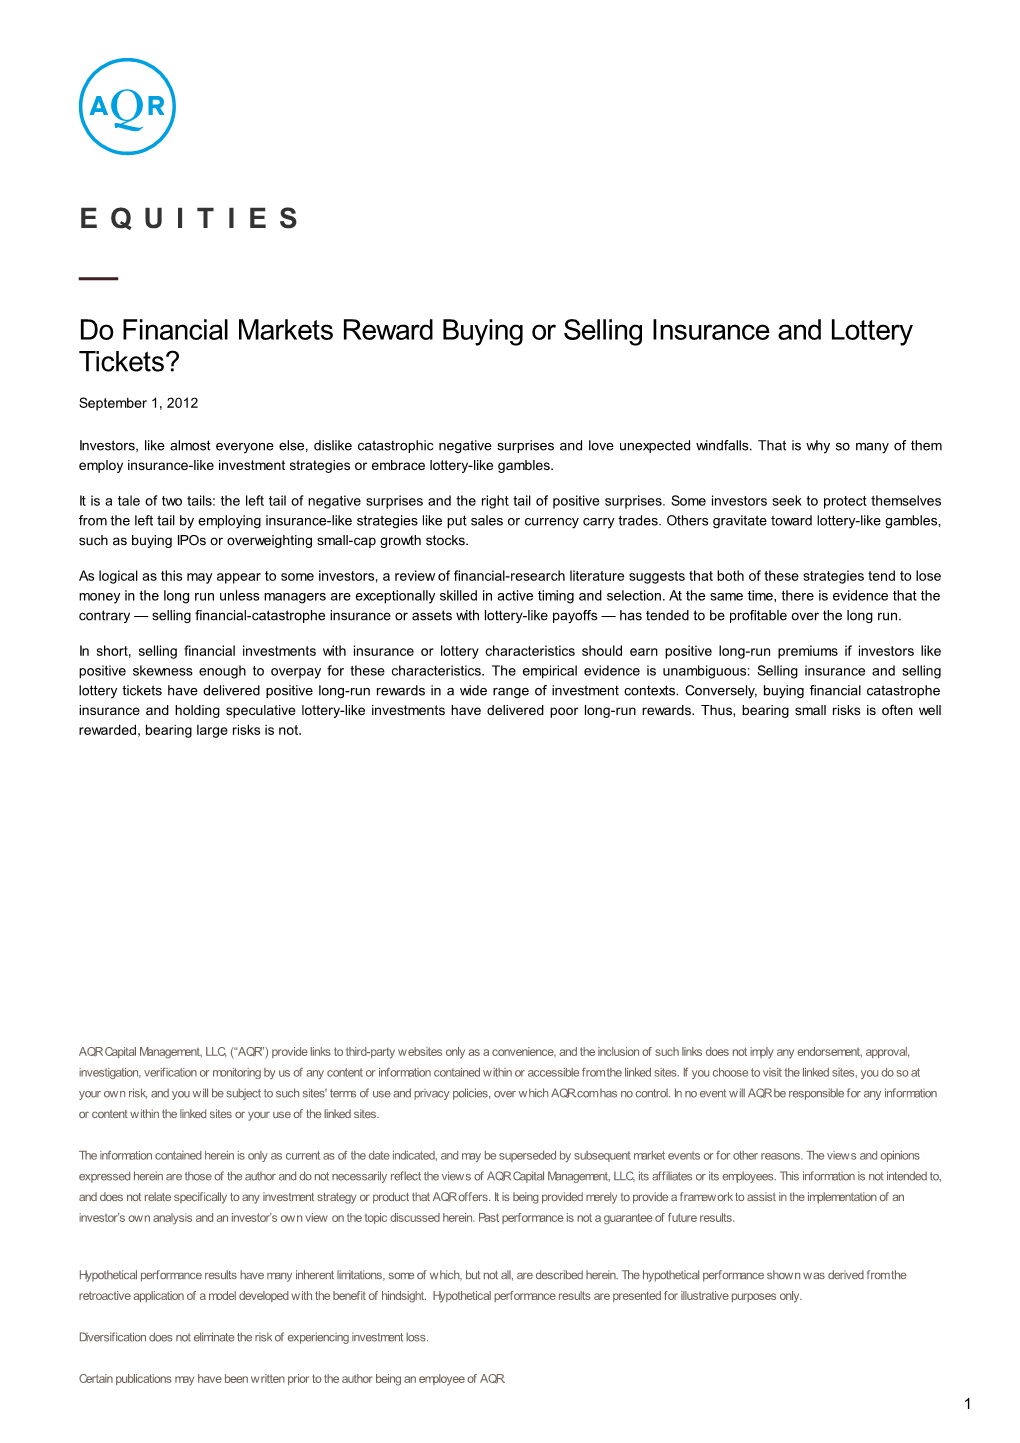 Do Financial Markets Reward Buying Or Selling Insurance and Lottery Tickets?